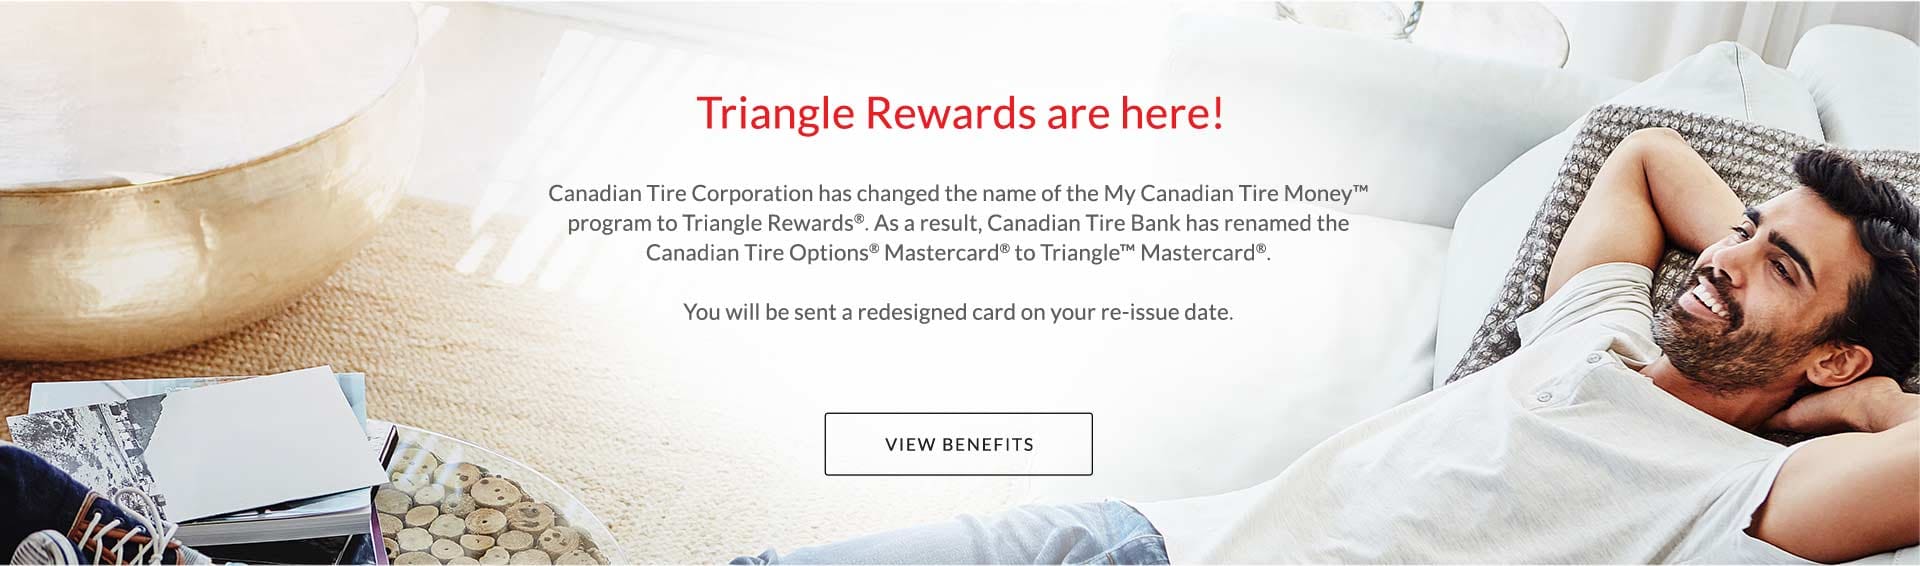 triangle rewards are here view benefits link opens in new tab